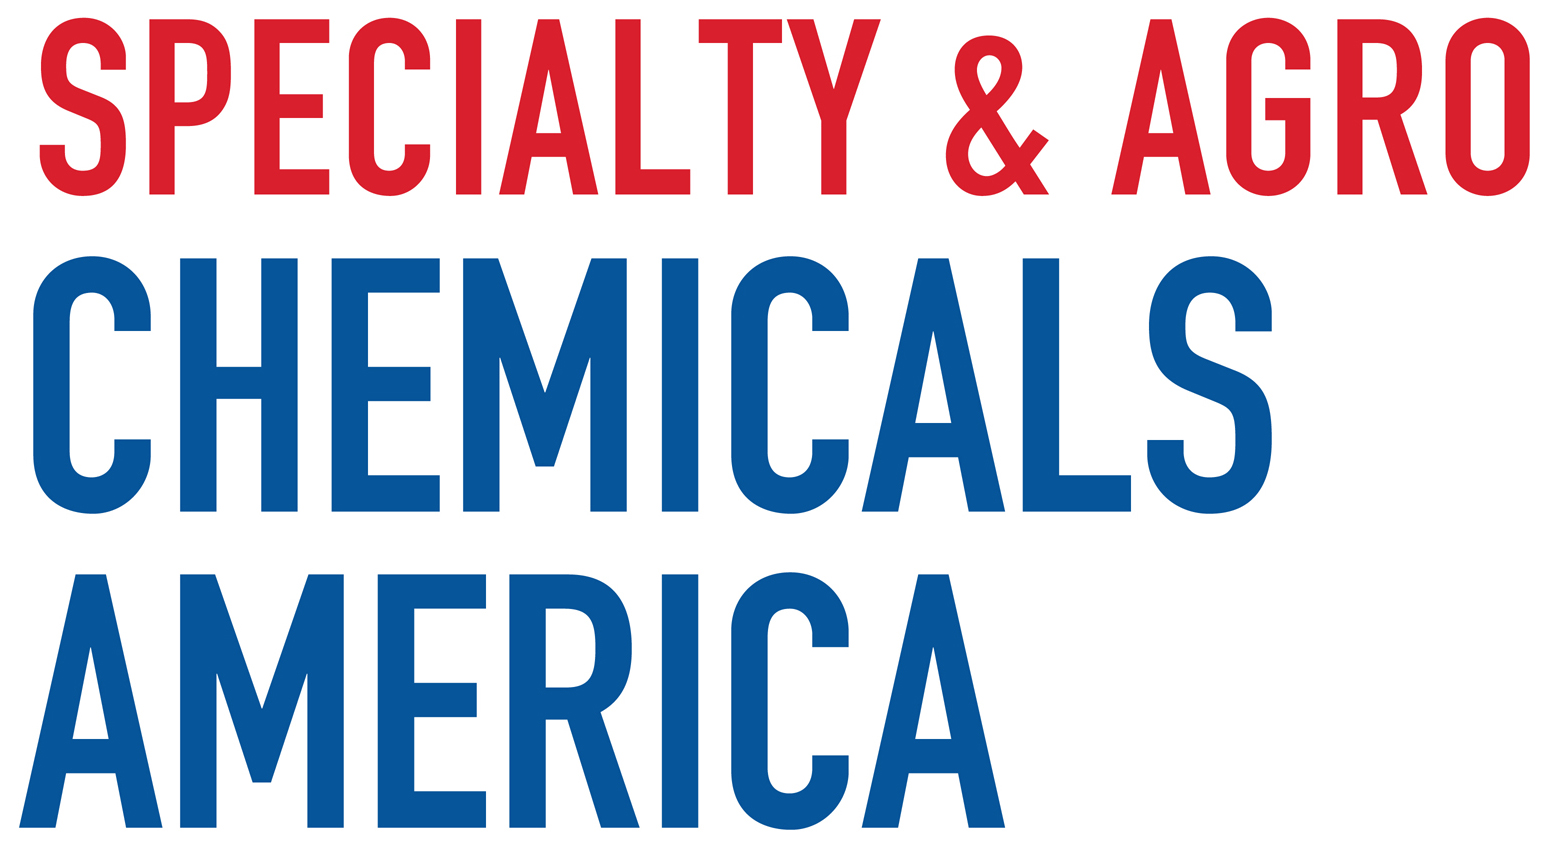 Join us at the Specialty & Agro Chemicals America event in Charleston, South Carolina